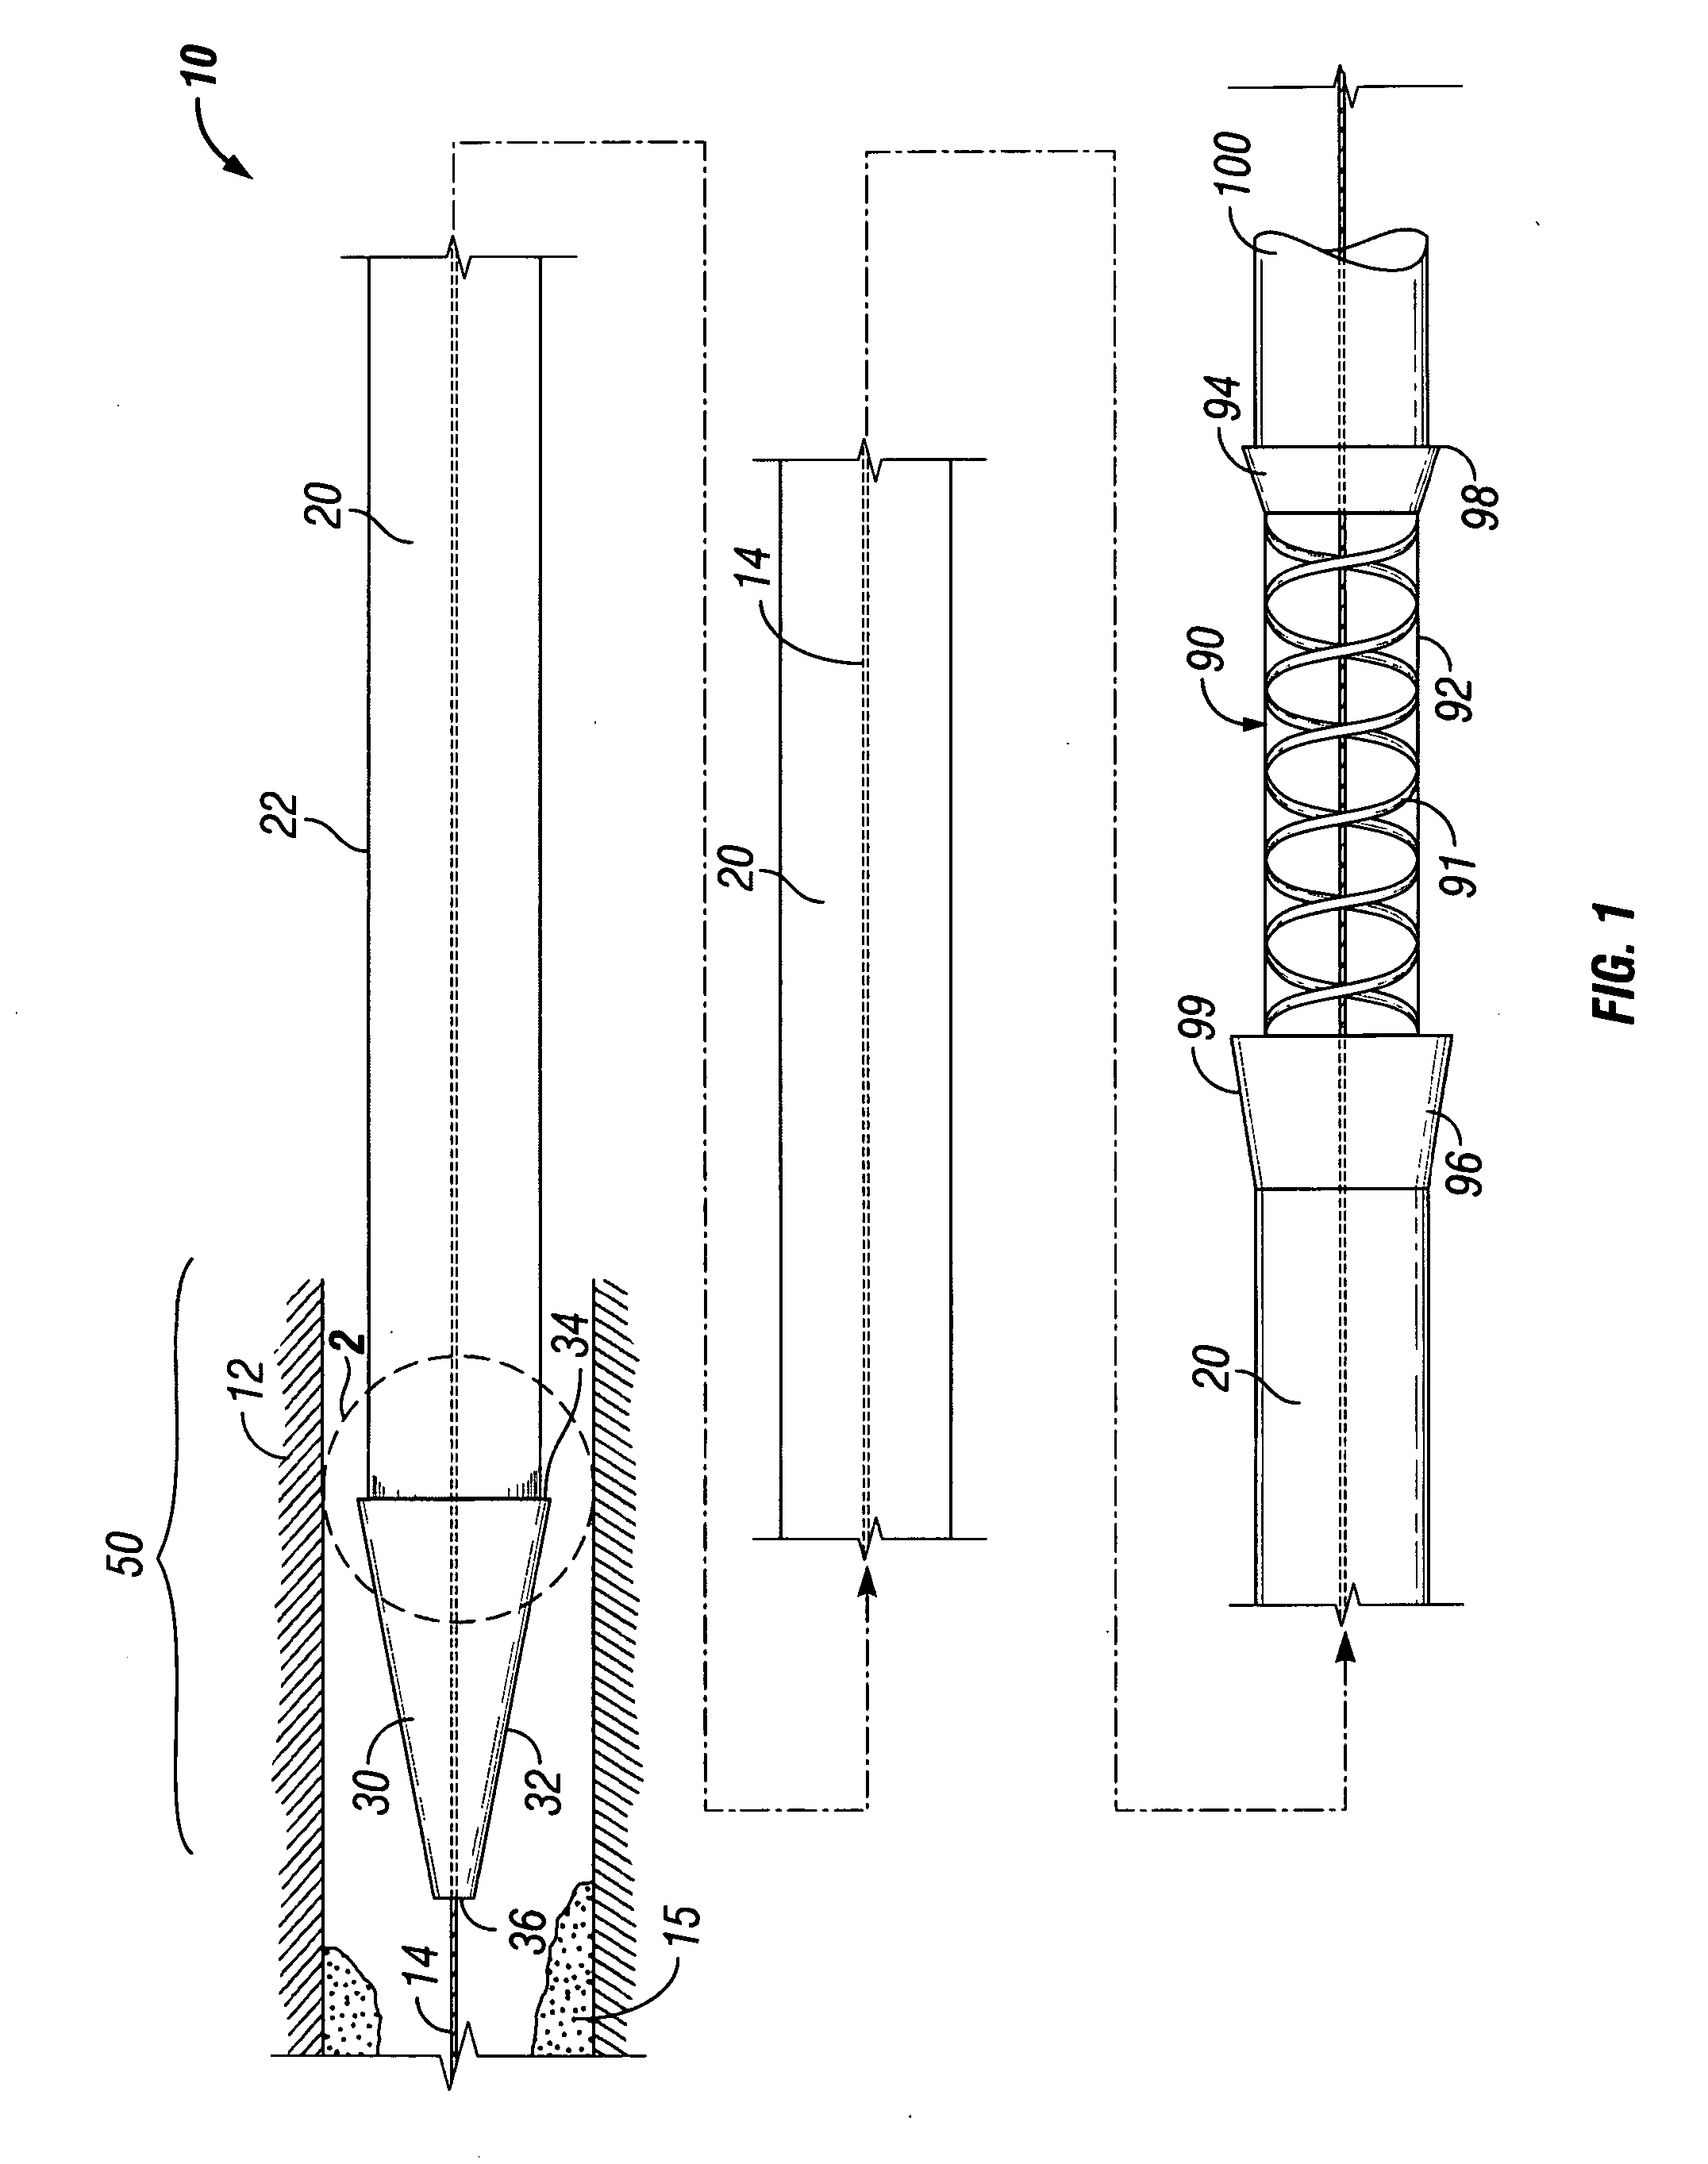 Esophageal dilation and stent delivery system and method of use